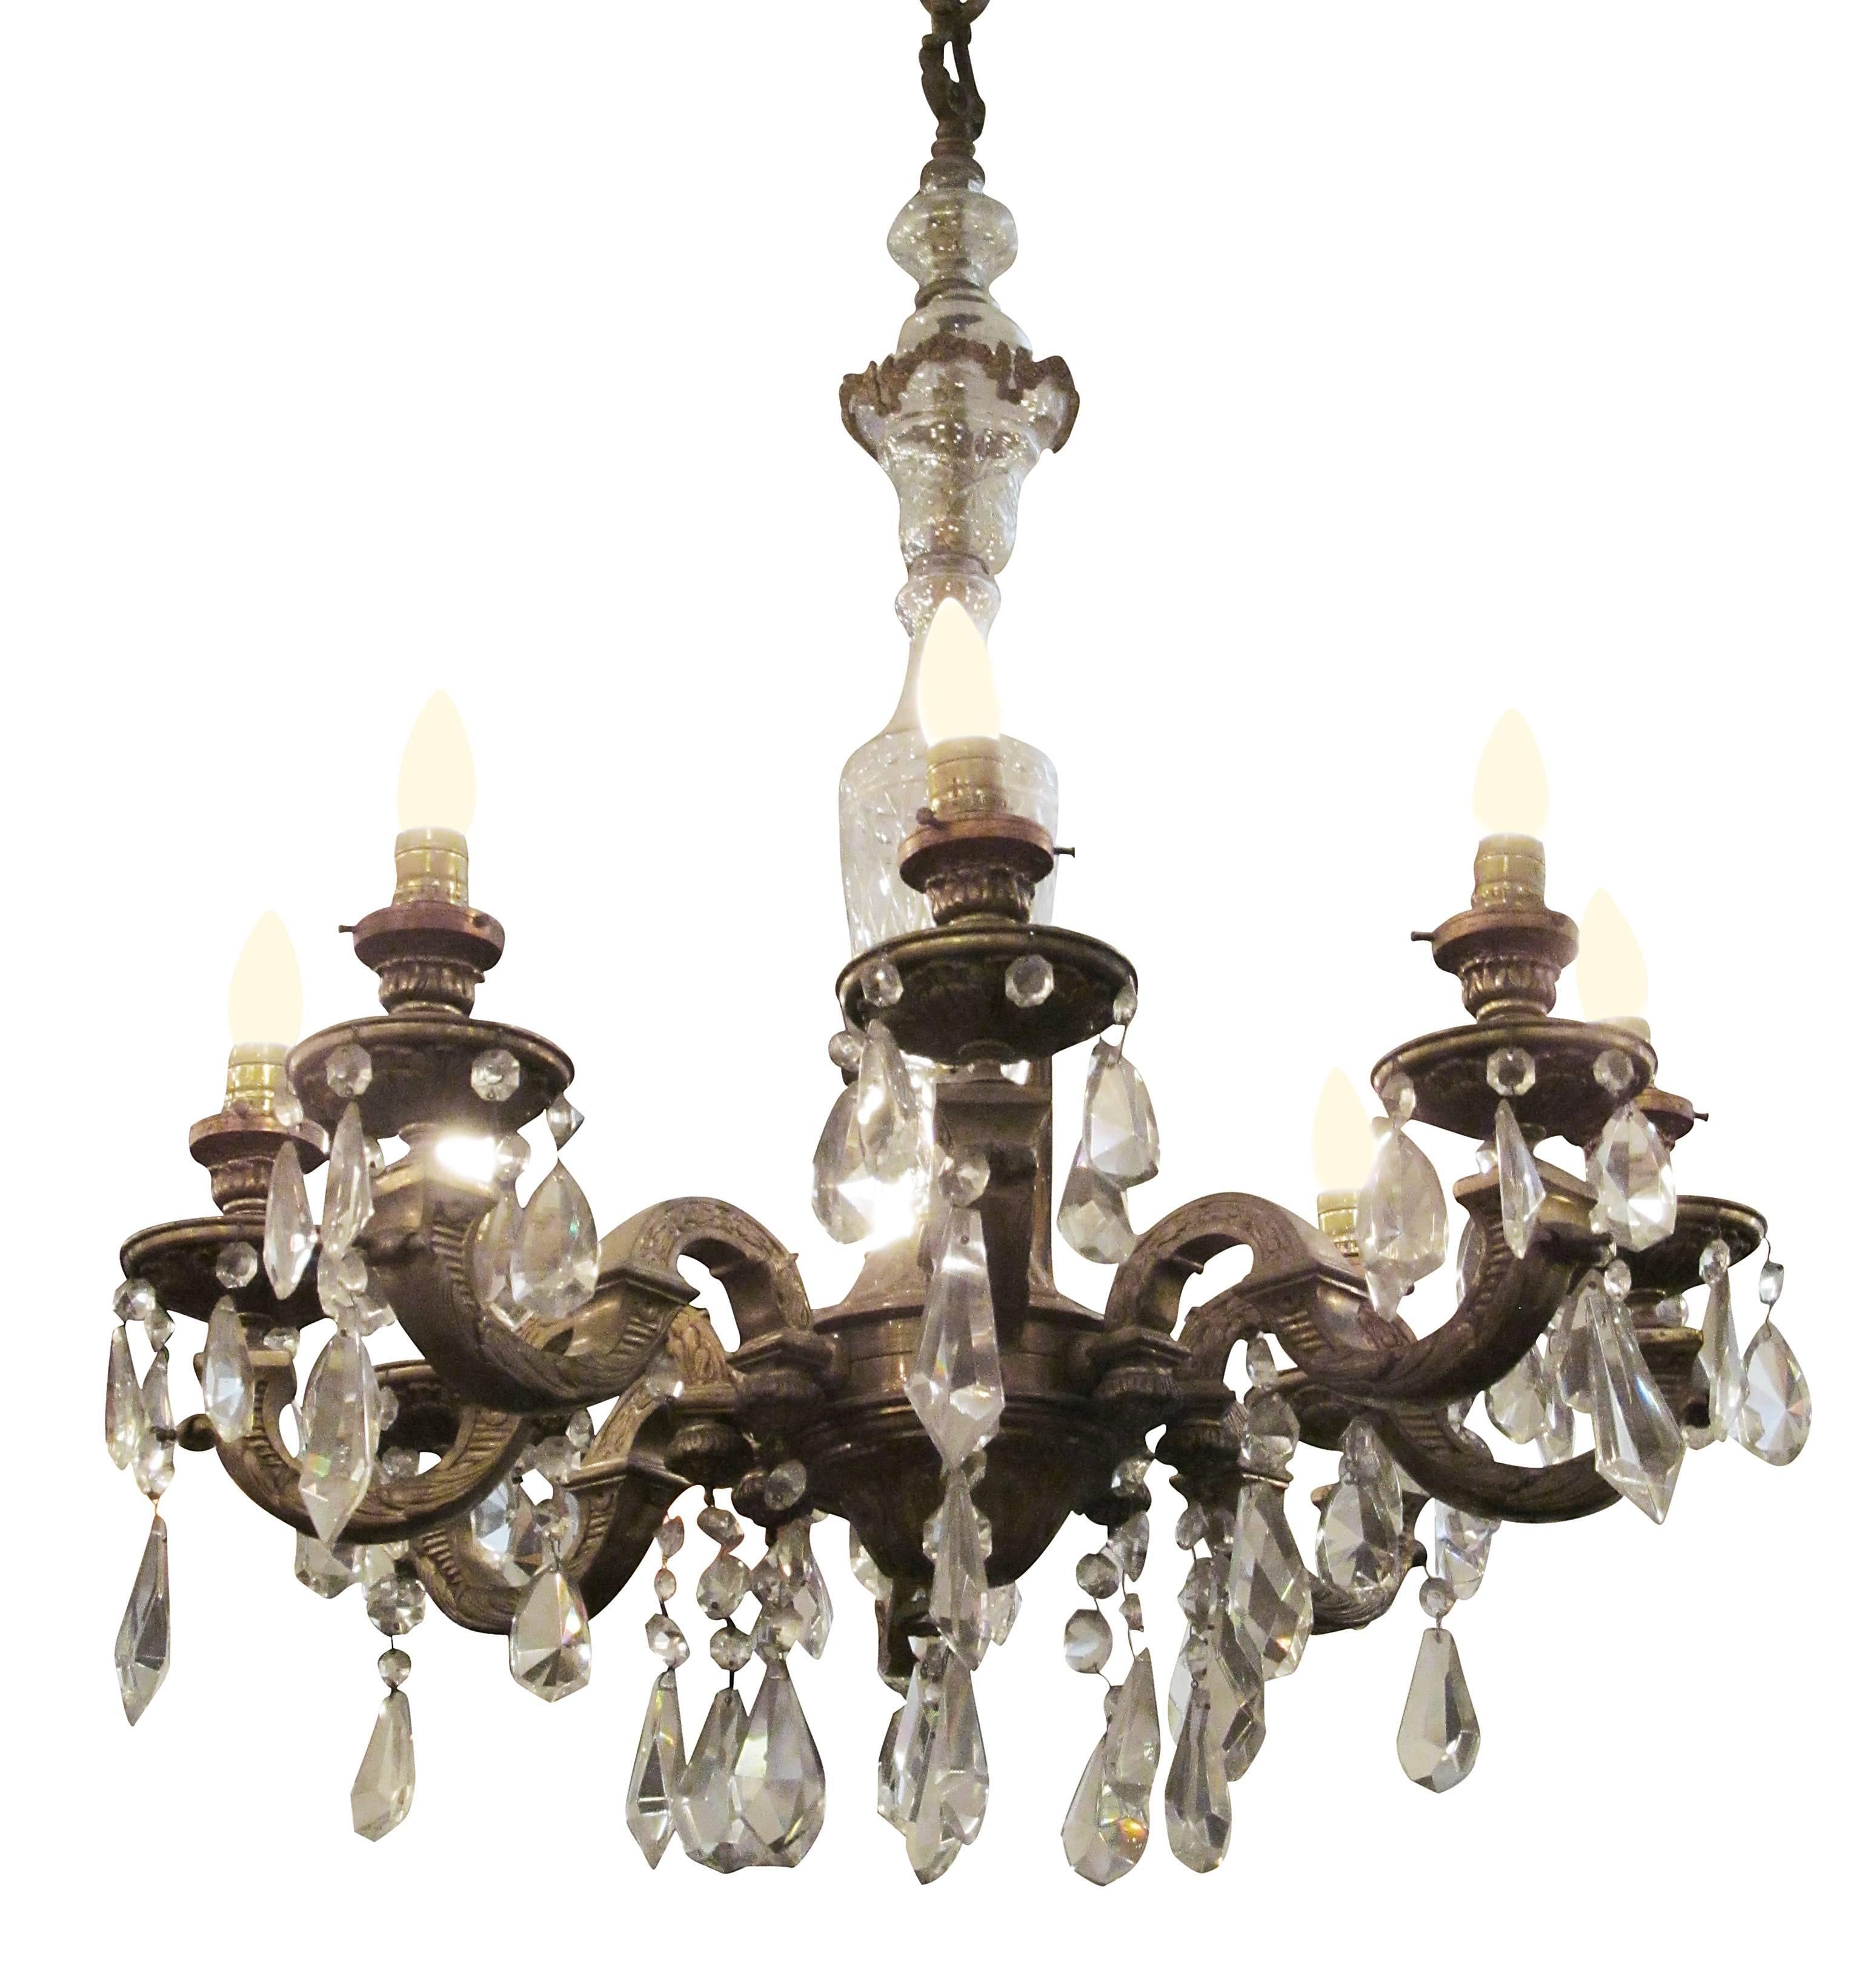 1930s bronze and crystal chandelier with eight arms. This chandelier is missing the original shades.  Price includes cleaning & wiring restoration. This can be seen at our 333 West 52nd St location in the Theater District West of Manhattan.